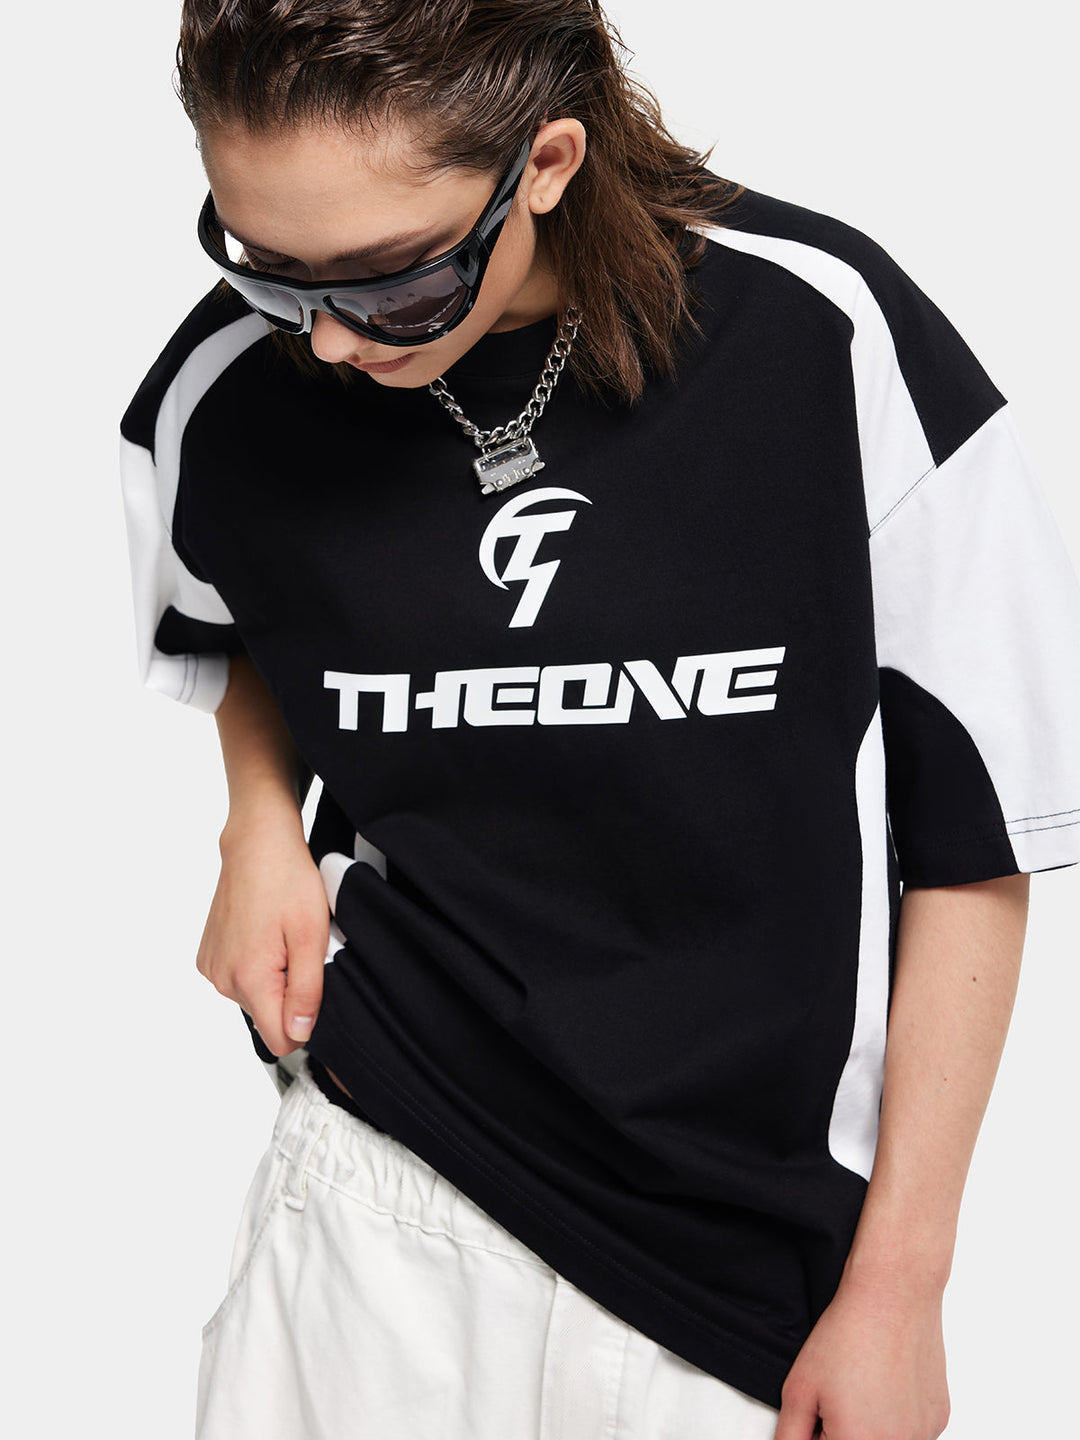 T-One Colorblock Letter Print Racing Tee-Black